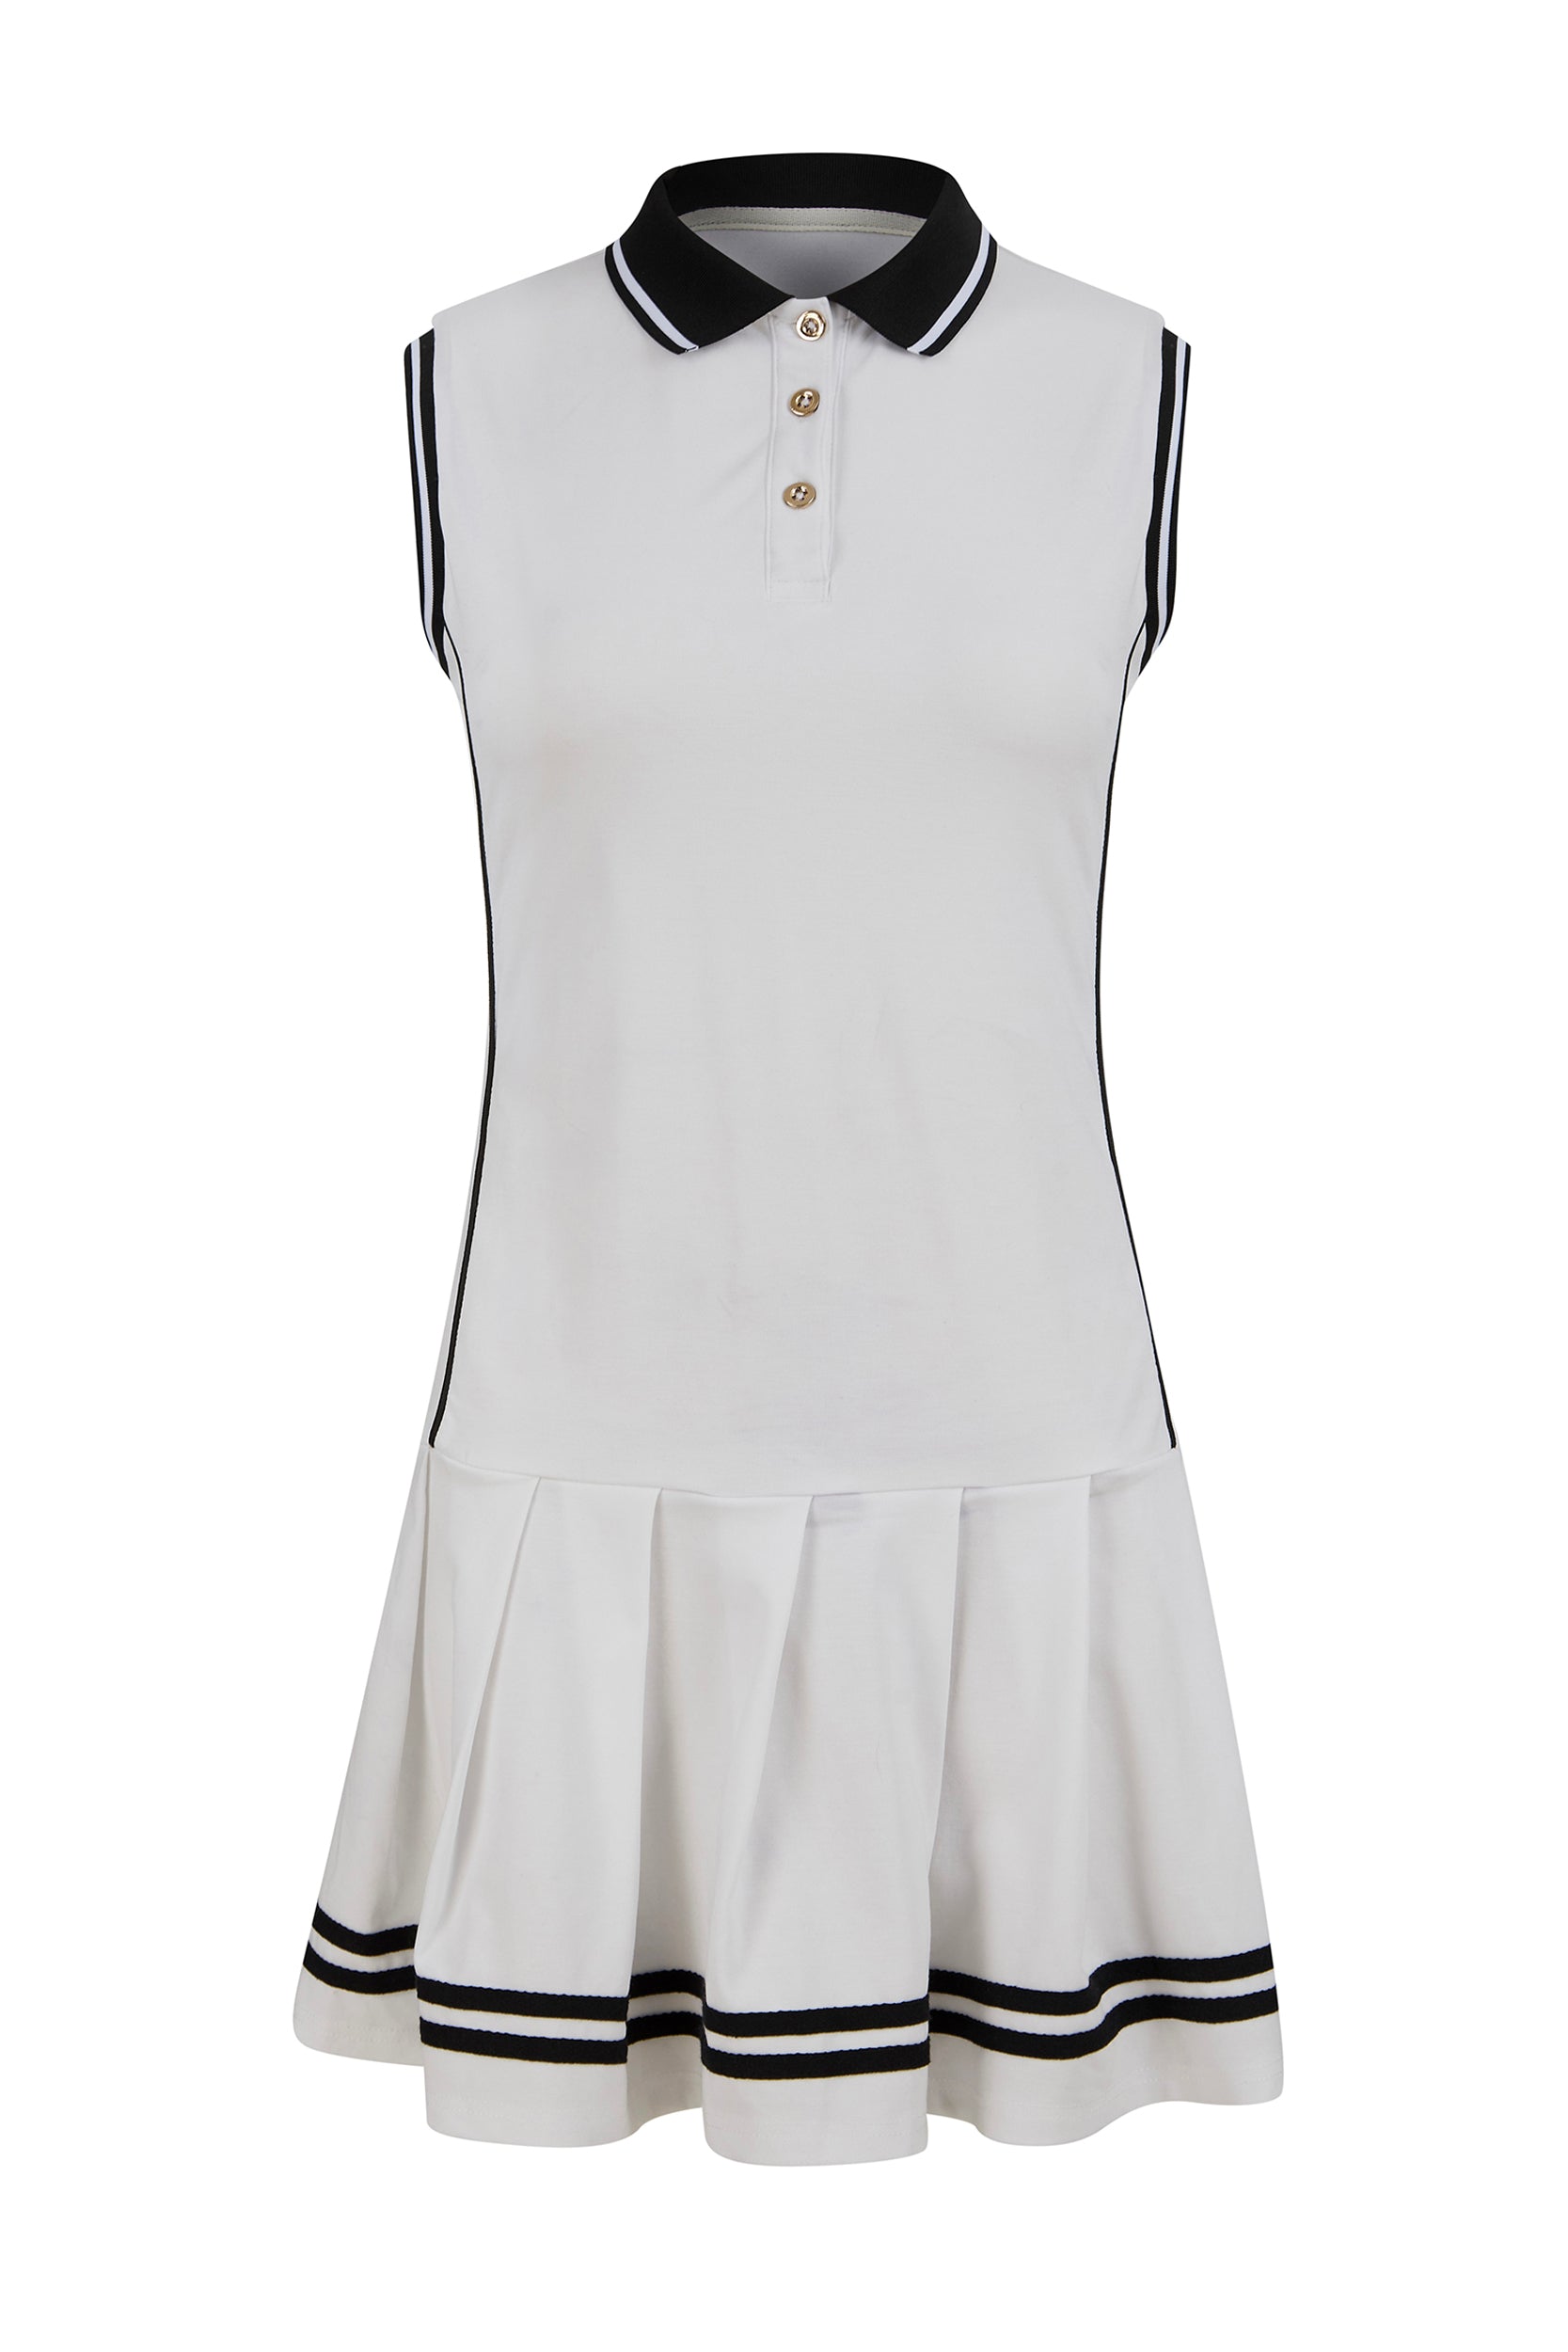 Tennis & Golf Clothing | FREE Shipping – the official sport luxe